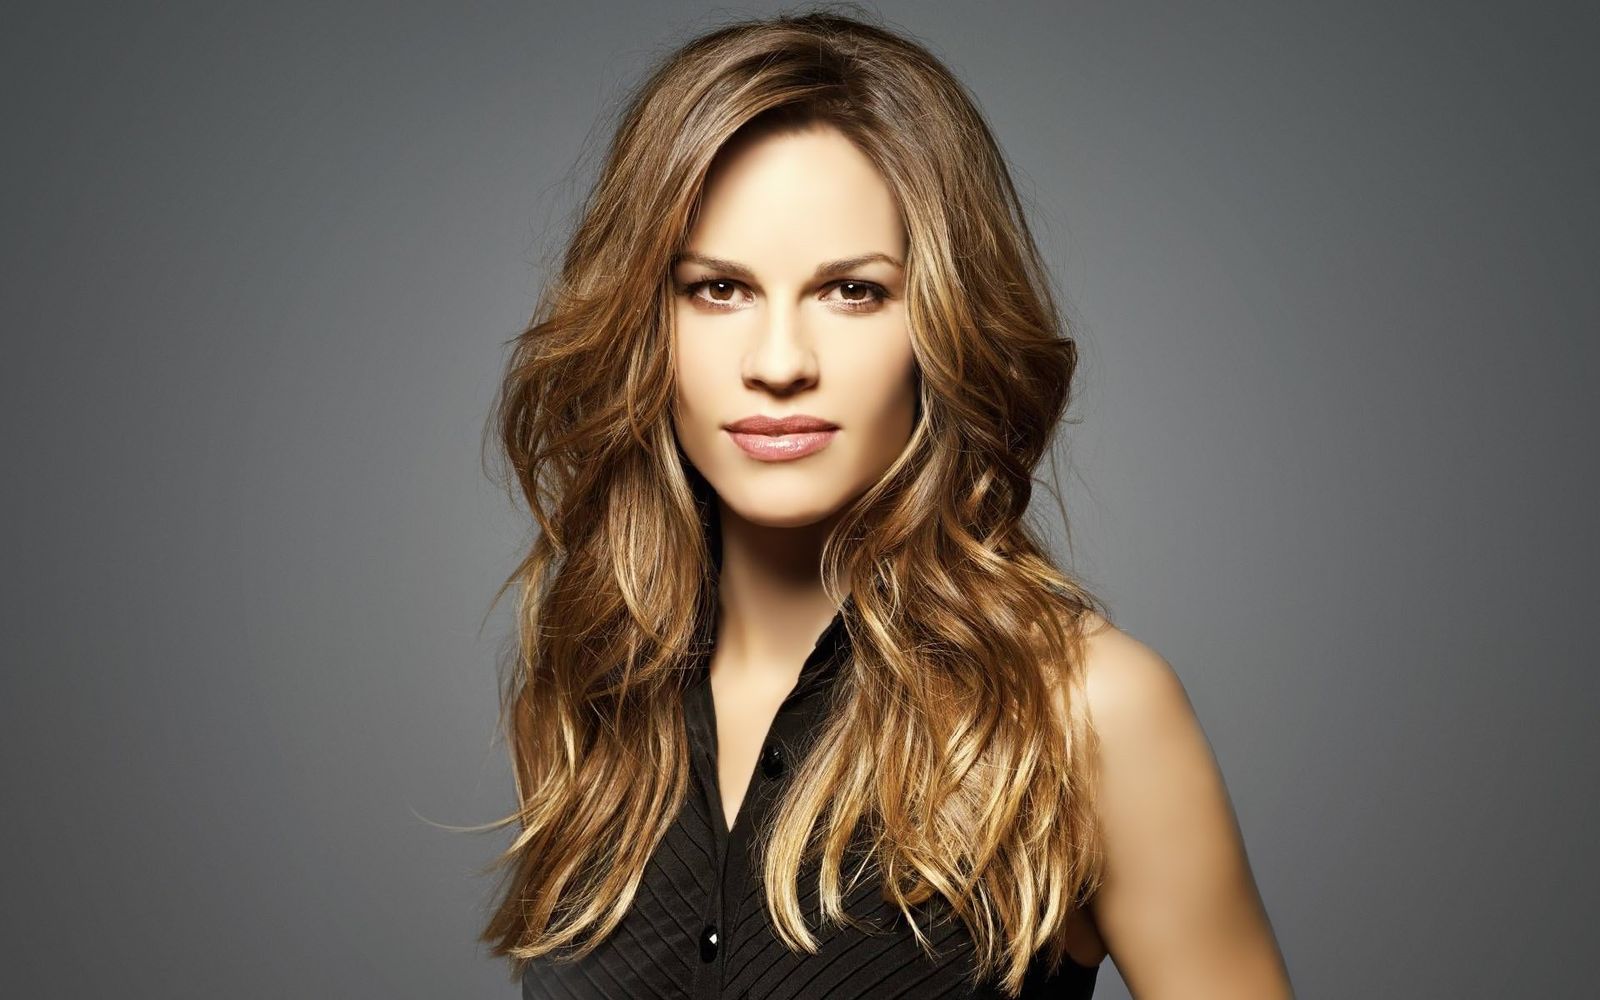 Hilary Swank Supporting Father through Tough Times